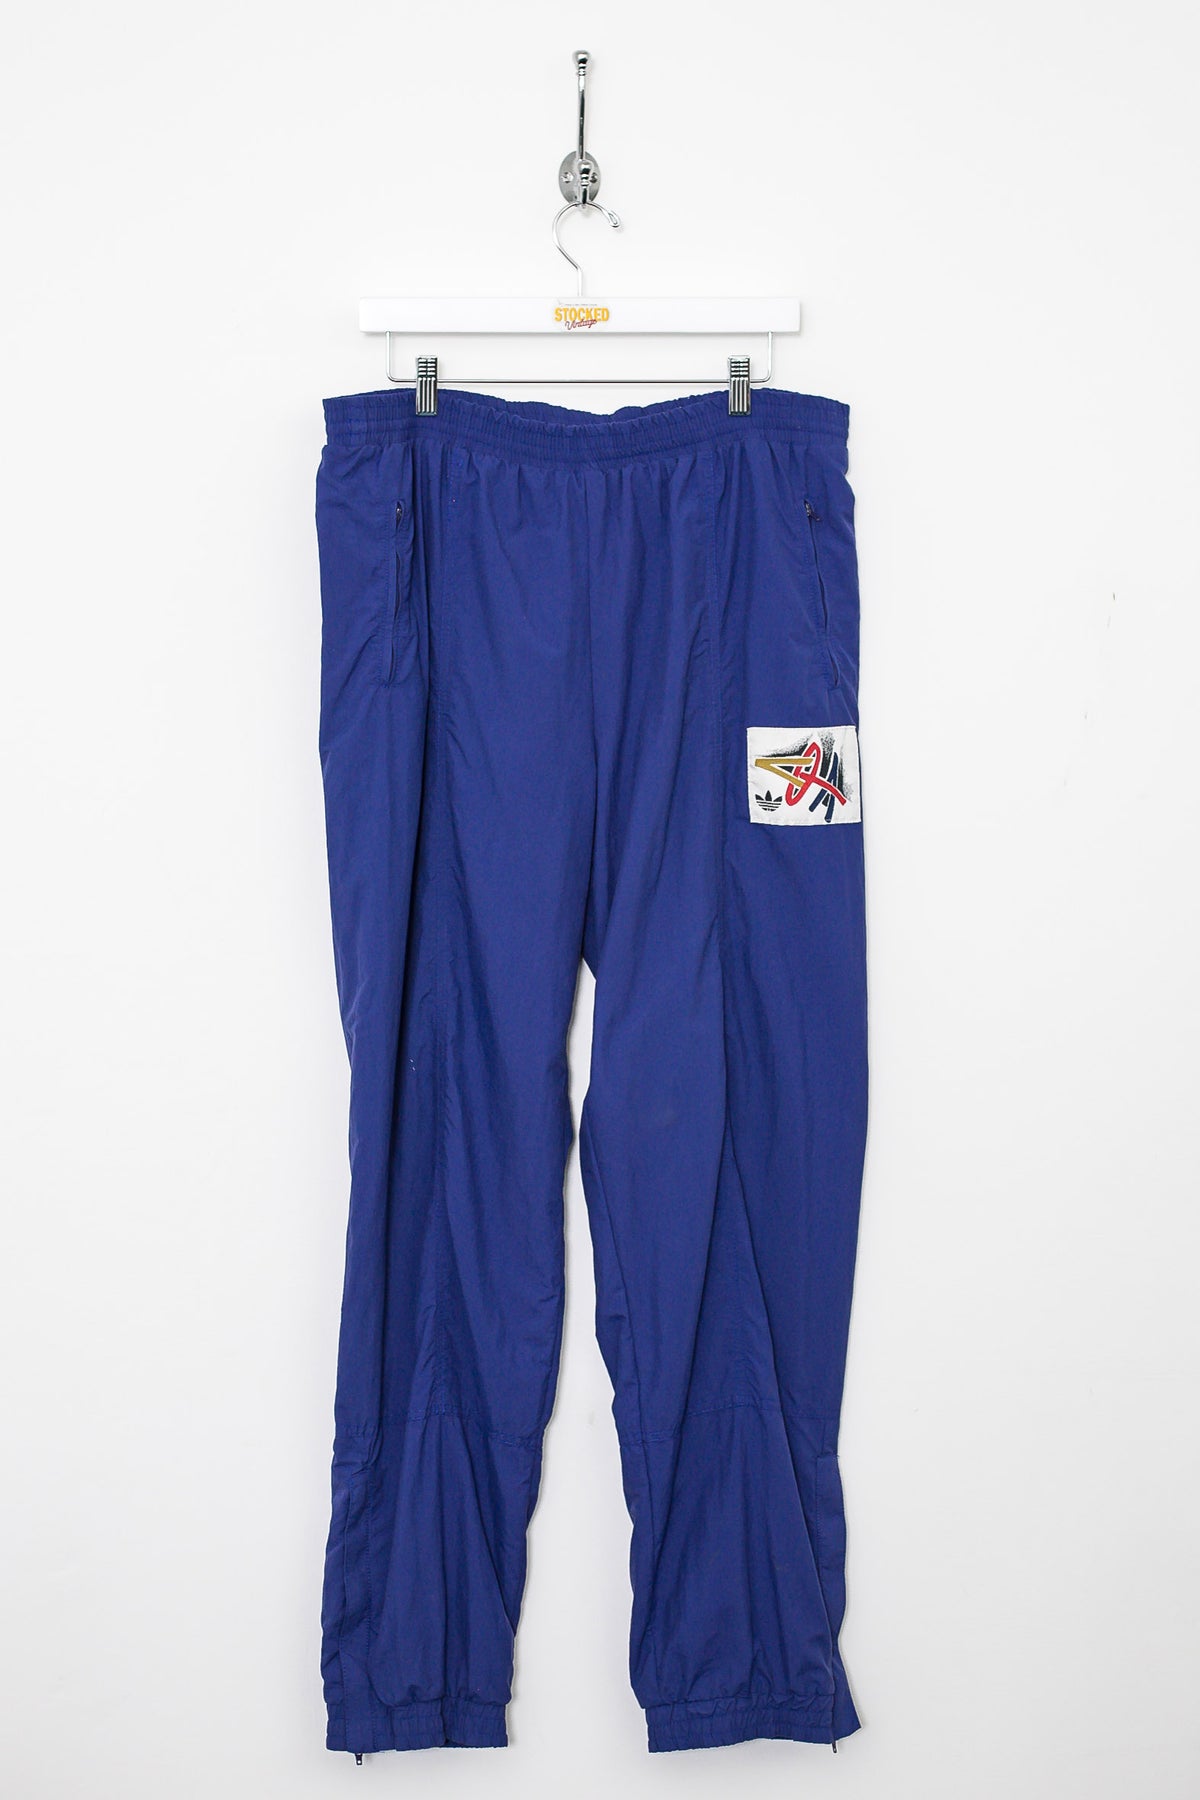 90s Adidas Popper Tracksuit Bottoms (L) – Stocked Vintage